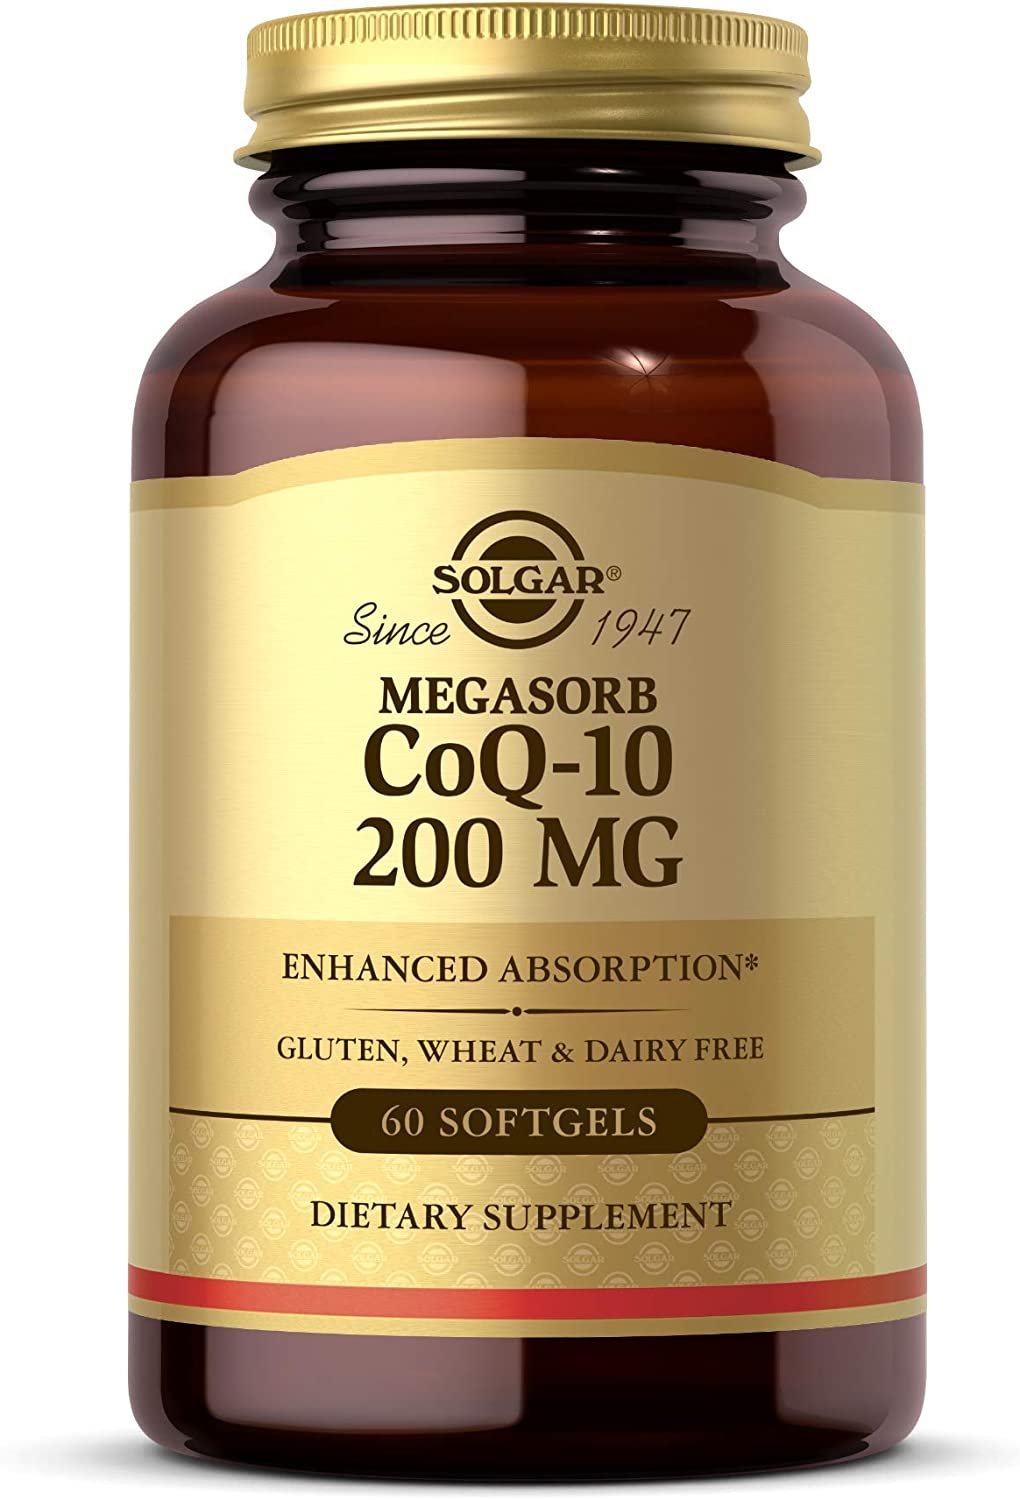 Solgar Megasorb CoQ-10 200 mg, 60 Softgels - Supports Heart & Brain Function - Coenzyme Q10 Supplement - Enhanced Absorption - Gluten Free, Dairy Free - 60 Servings